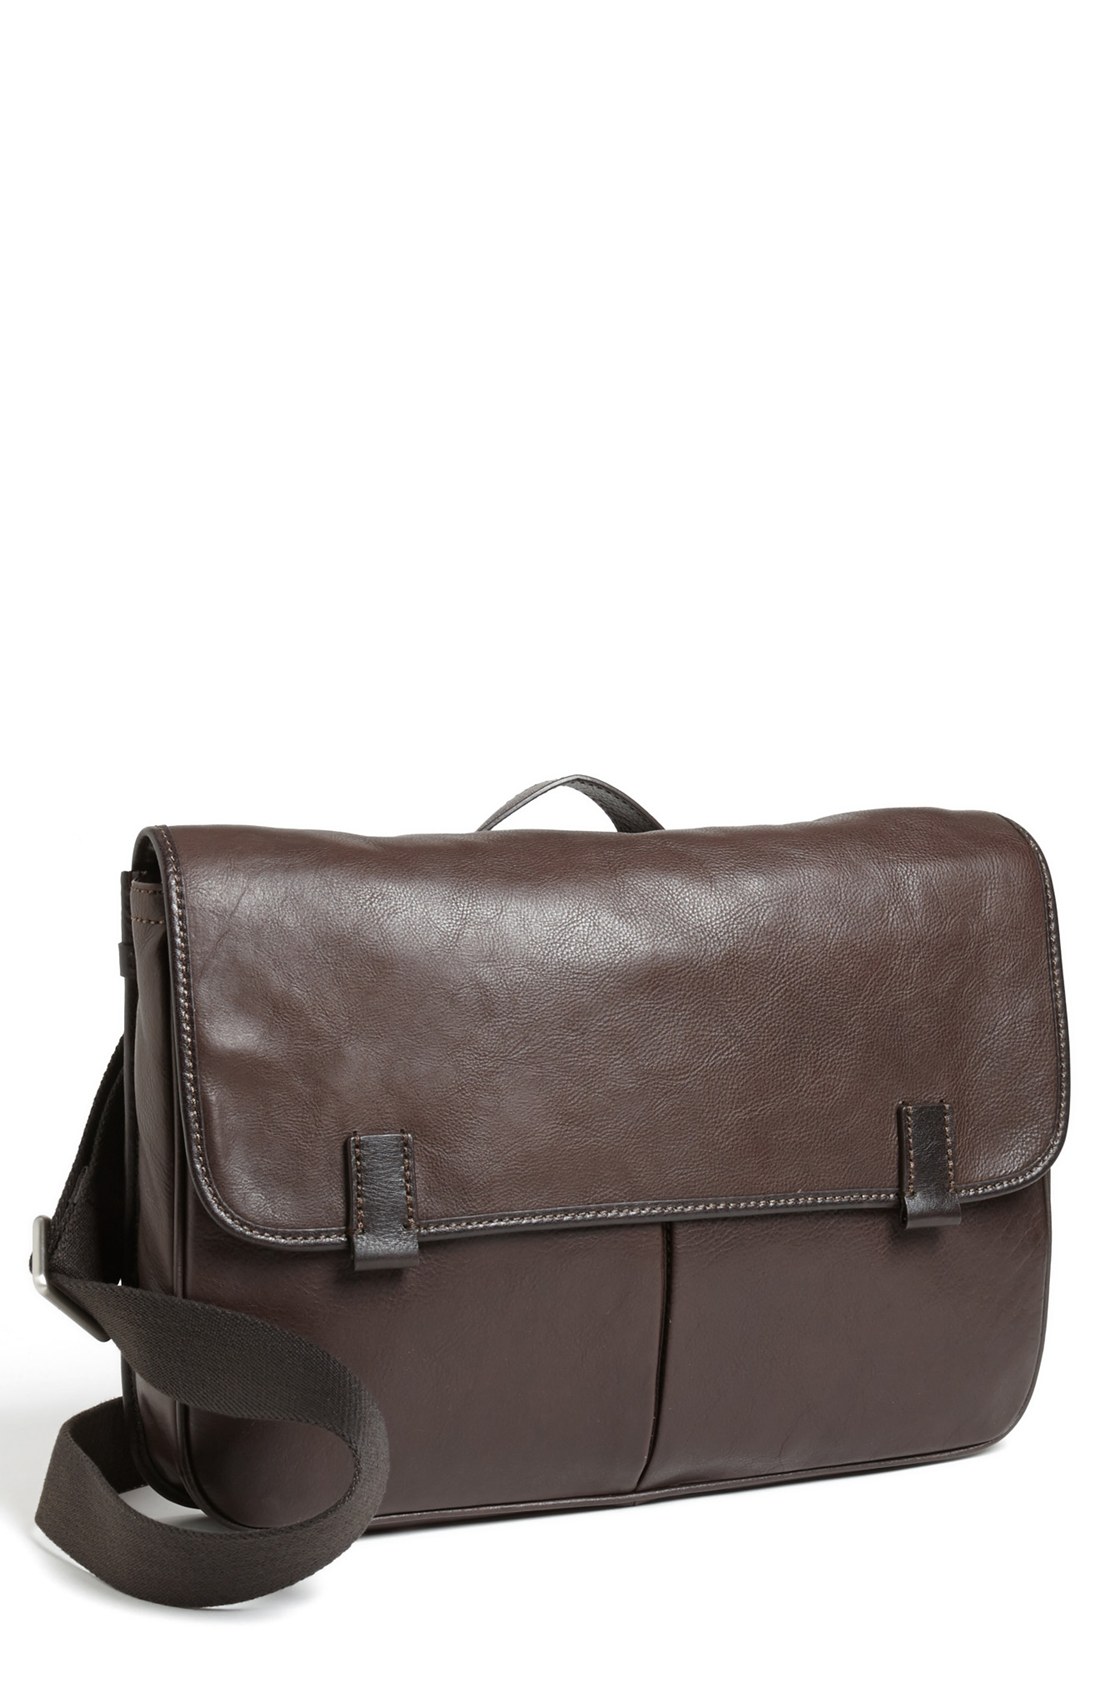 Fossil Leather Bags For Men | IUCN Water